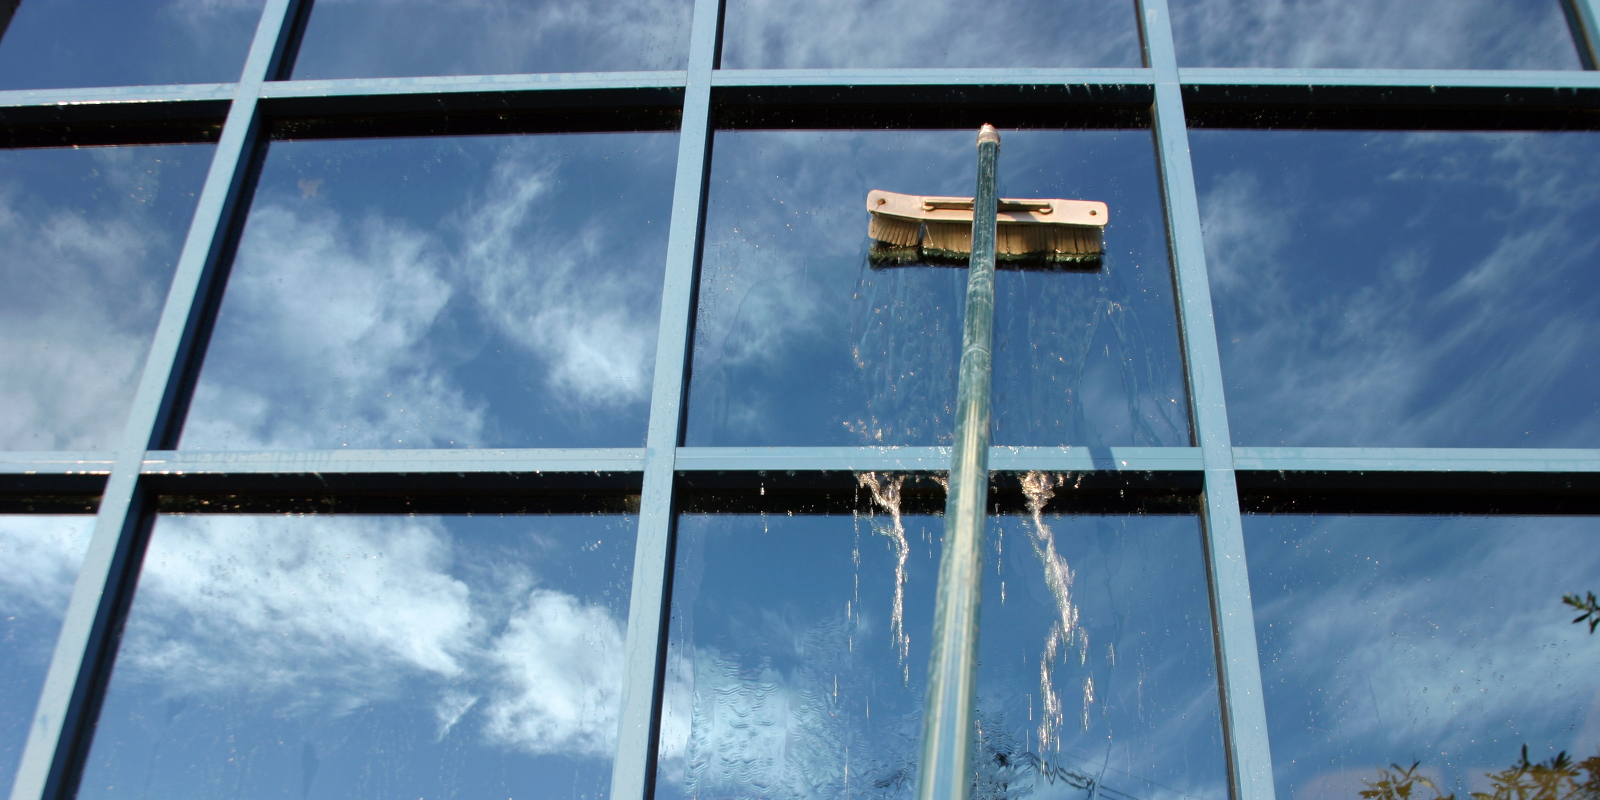 window cleaning services in welling, bexley and london